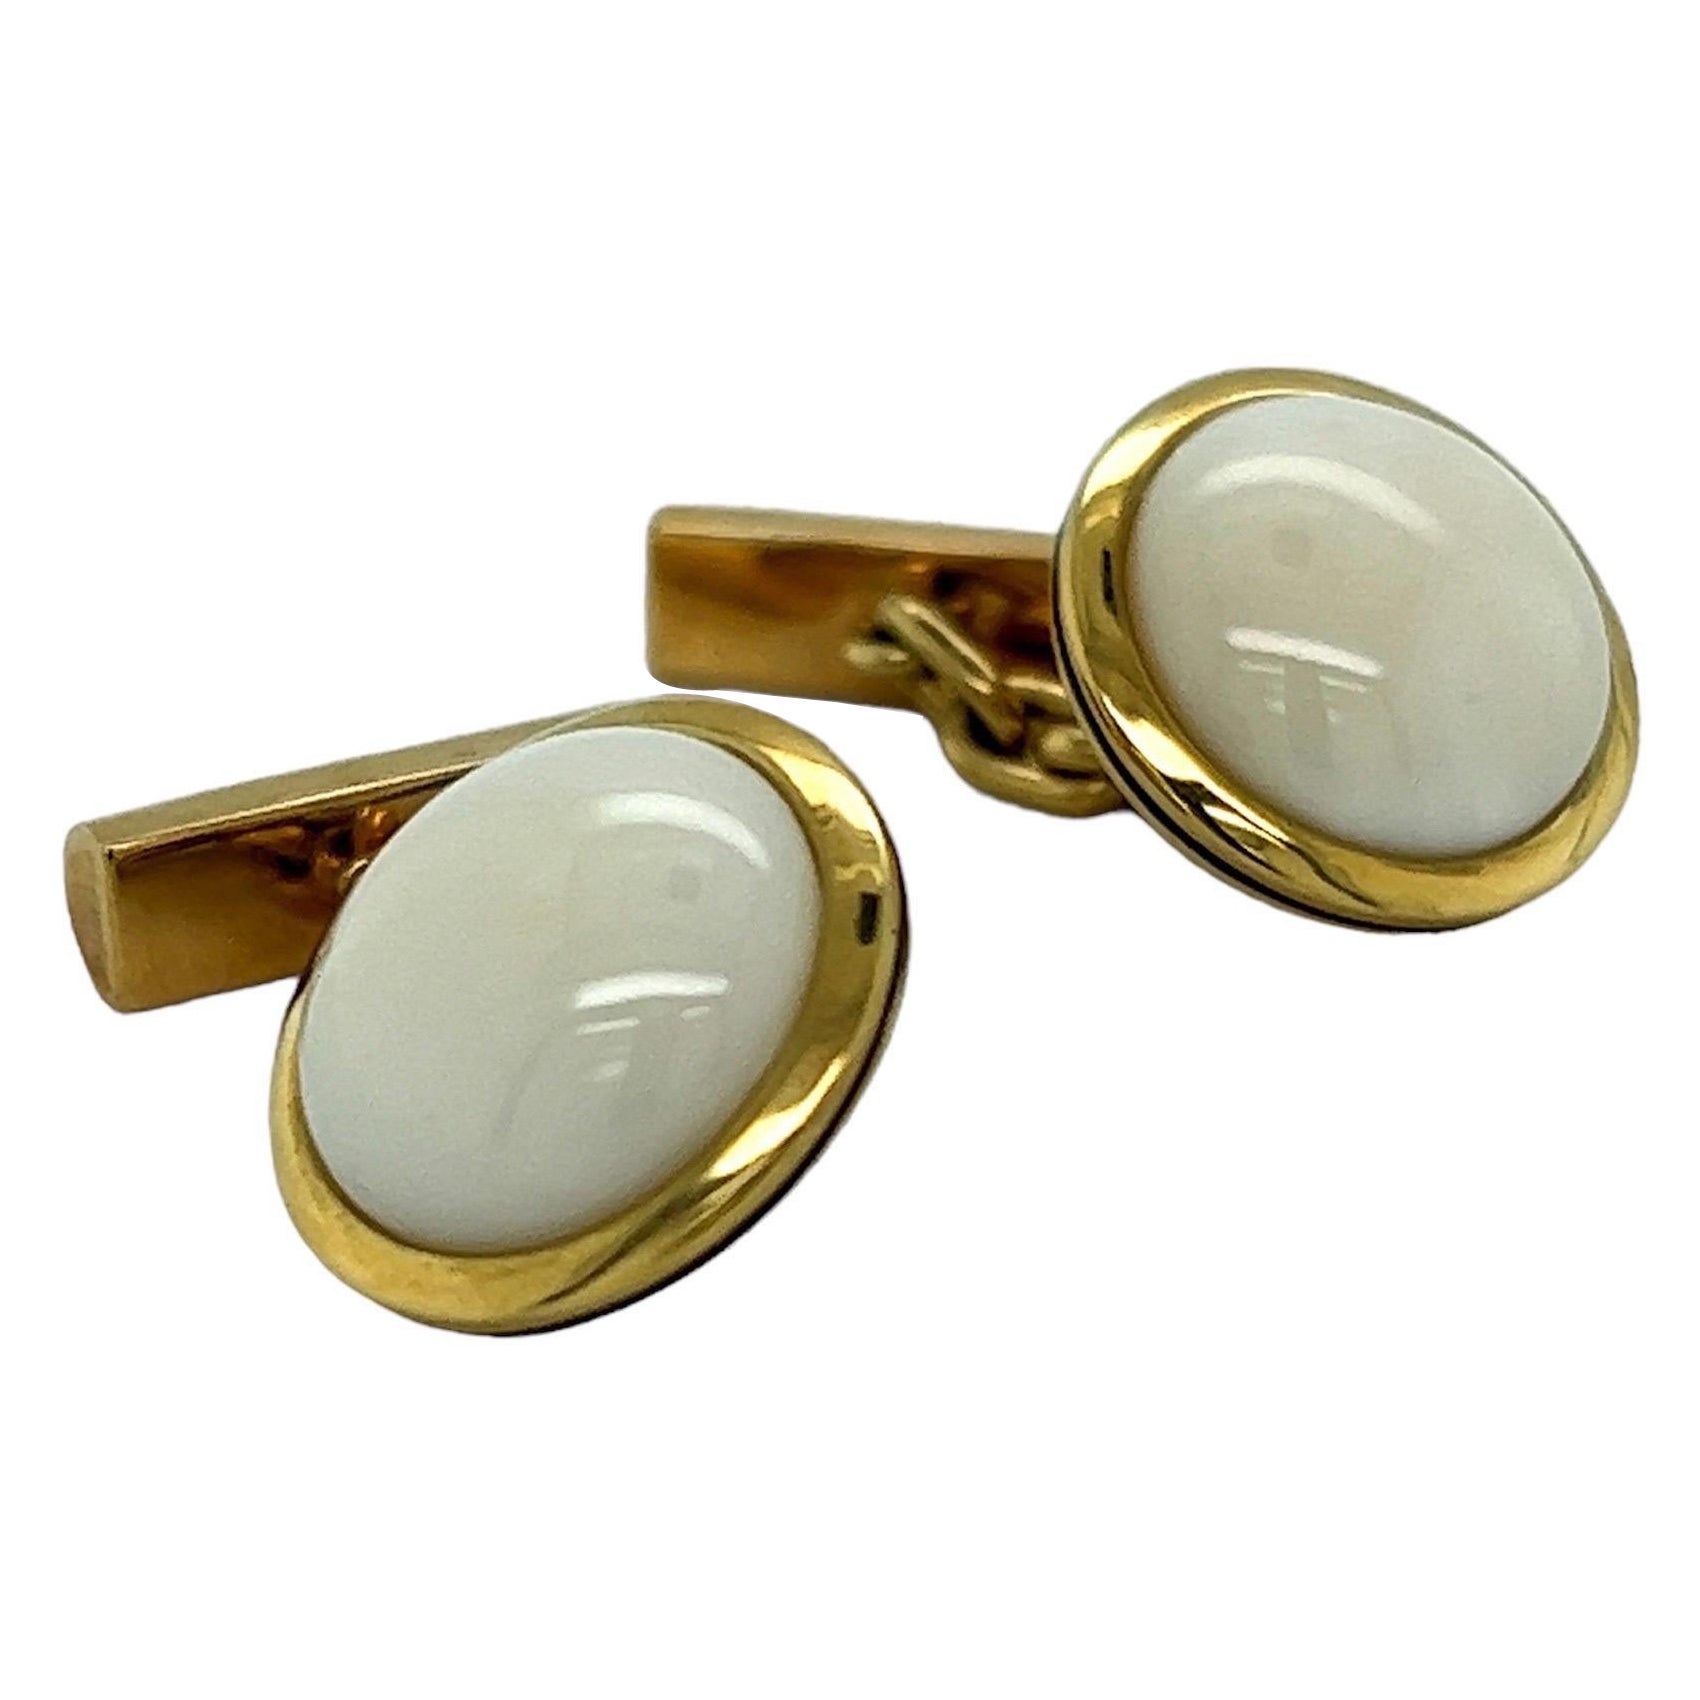 Exquisite 18k Yellow Gold Cufflinks with White Coral and Black Enamel